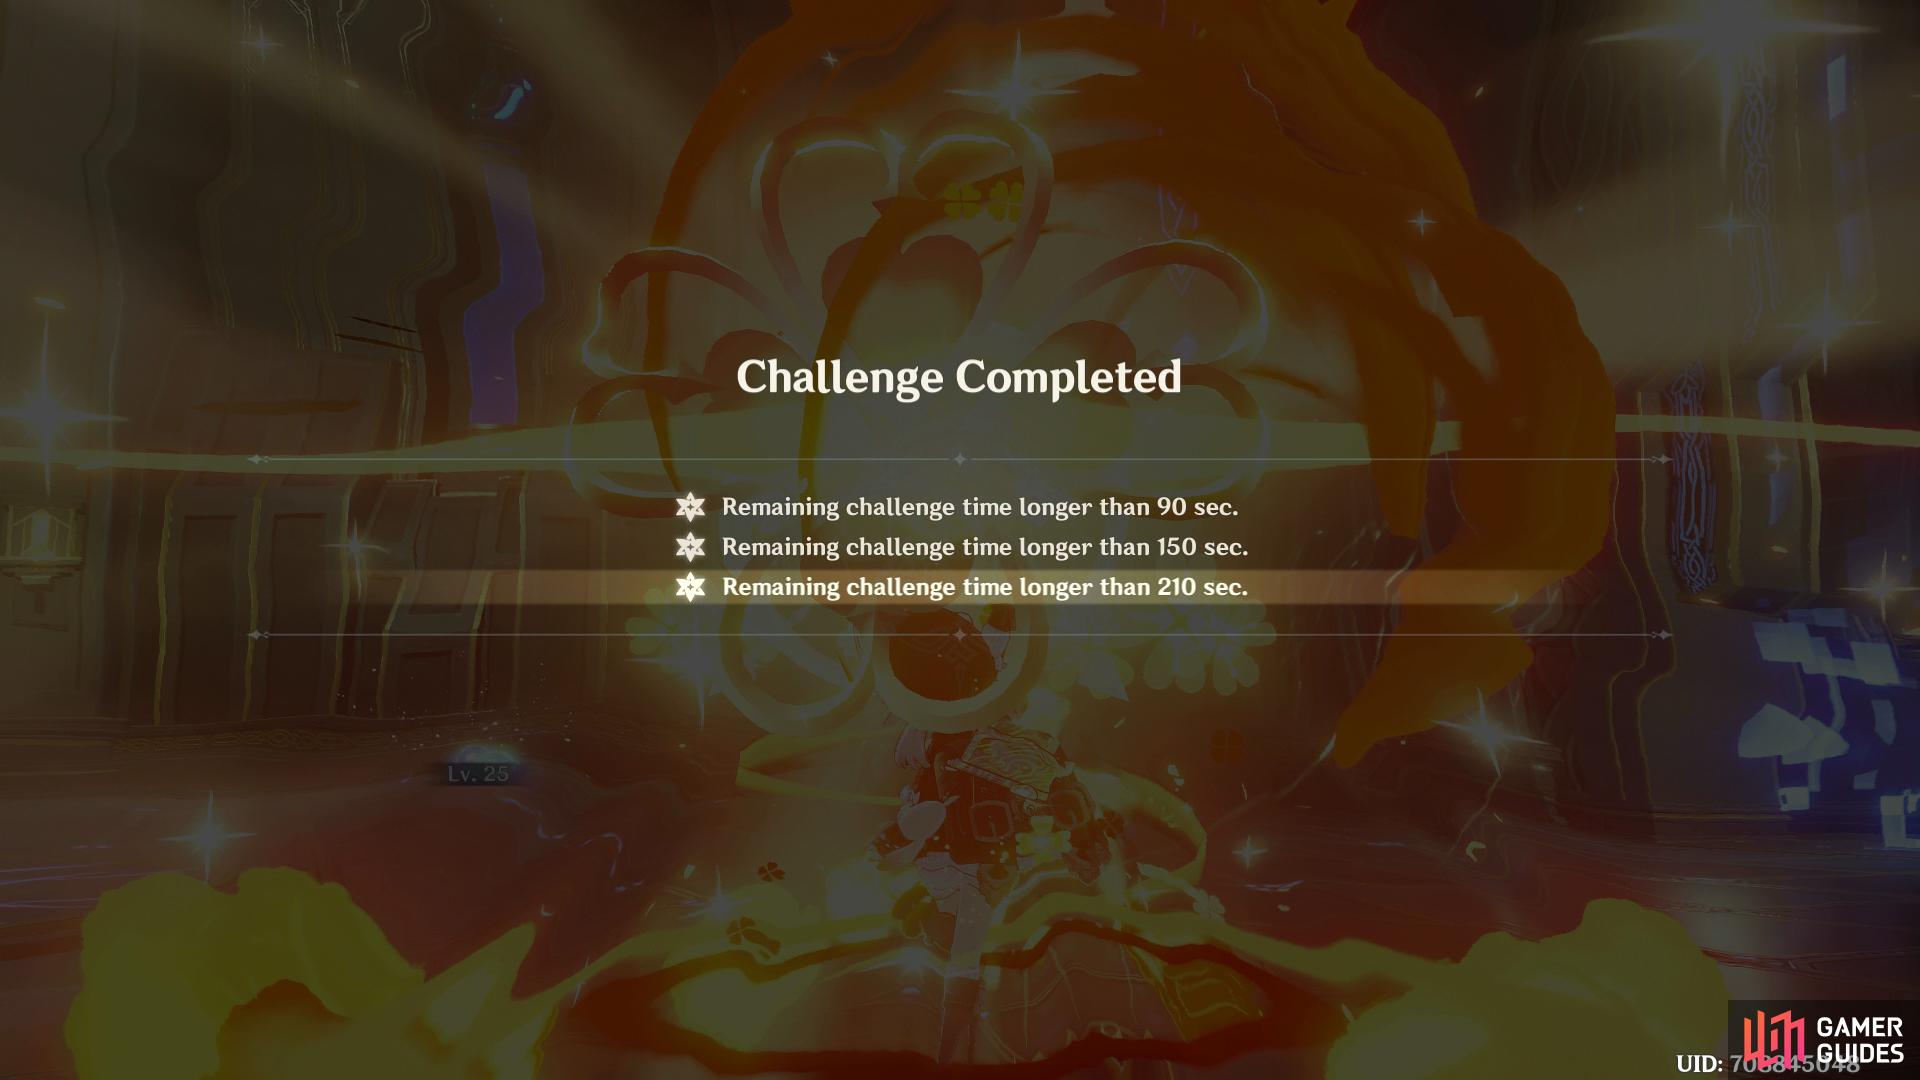 you will get one Abyssal Star per each challenge completed